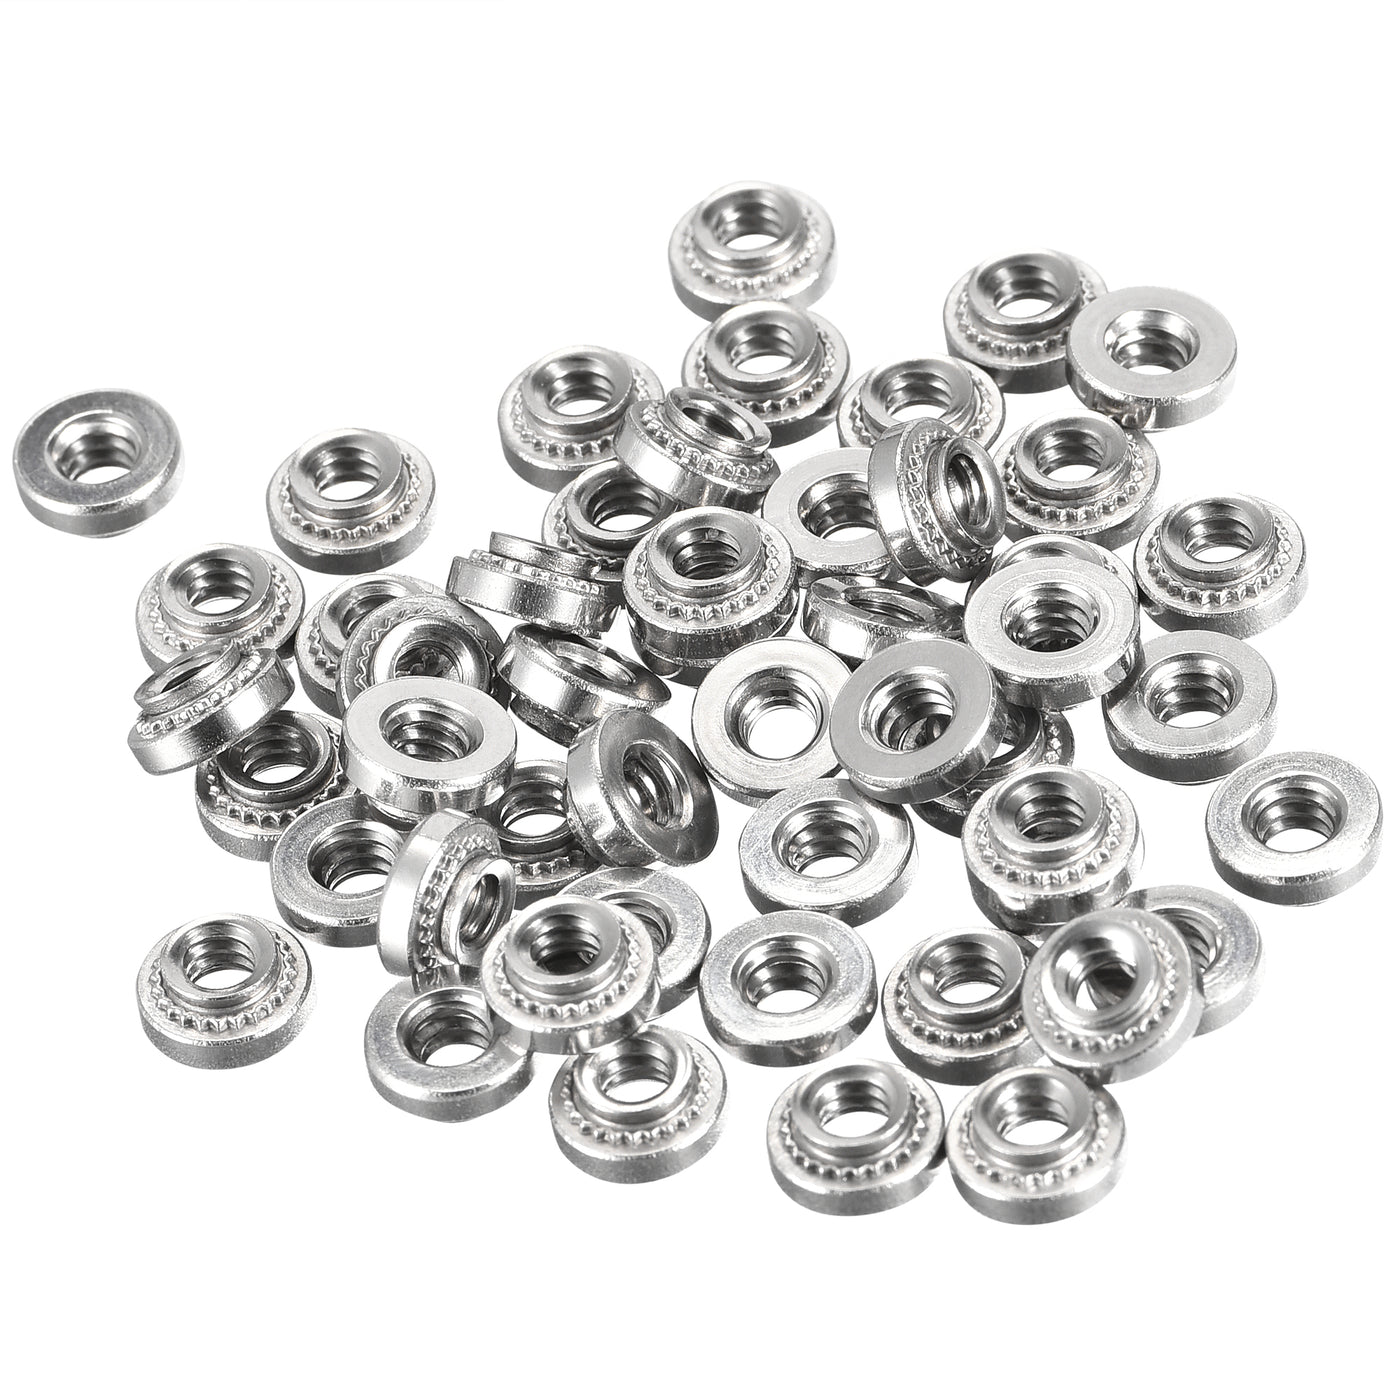 uxcell Uxcell Self -Clinching Nuts,#6-32x2.74mm Stainless Steel Rivet Nut Fastener 100pcs